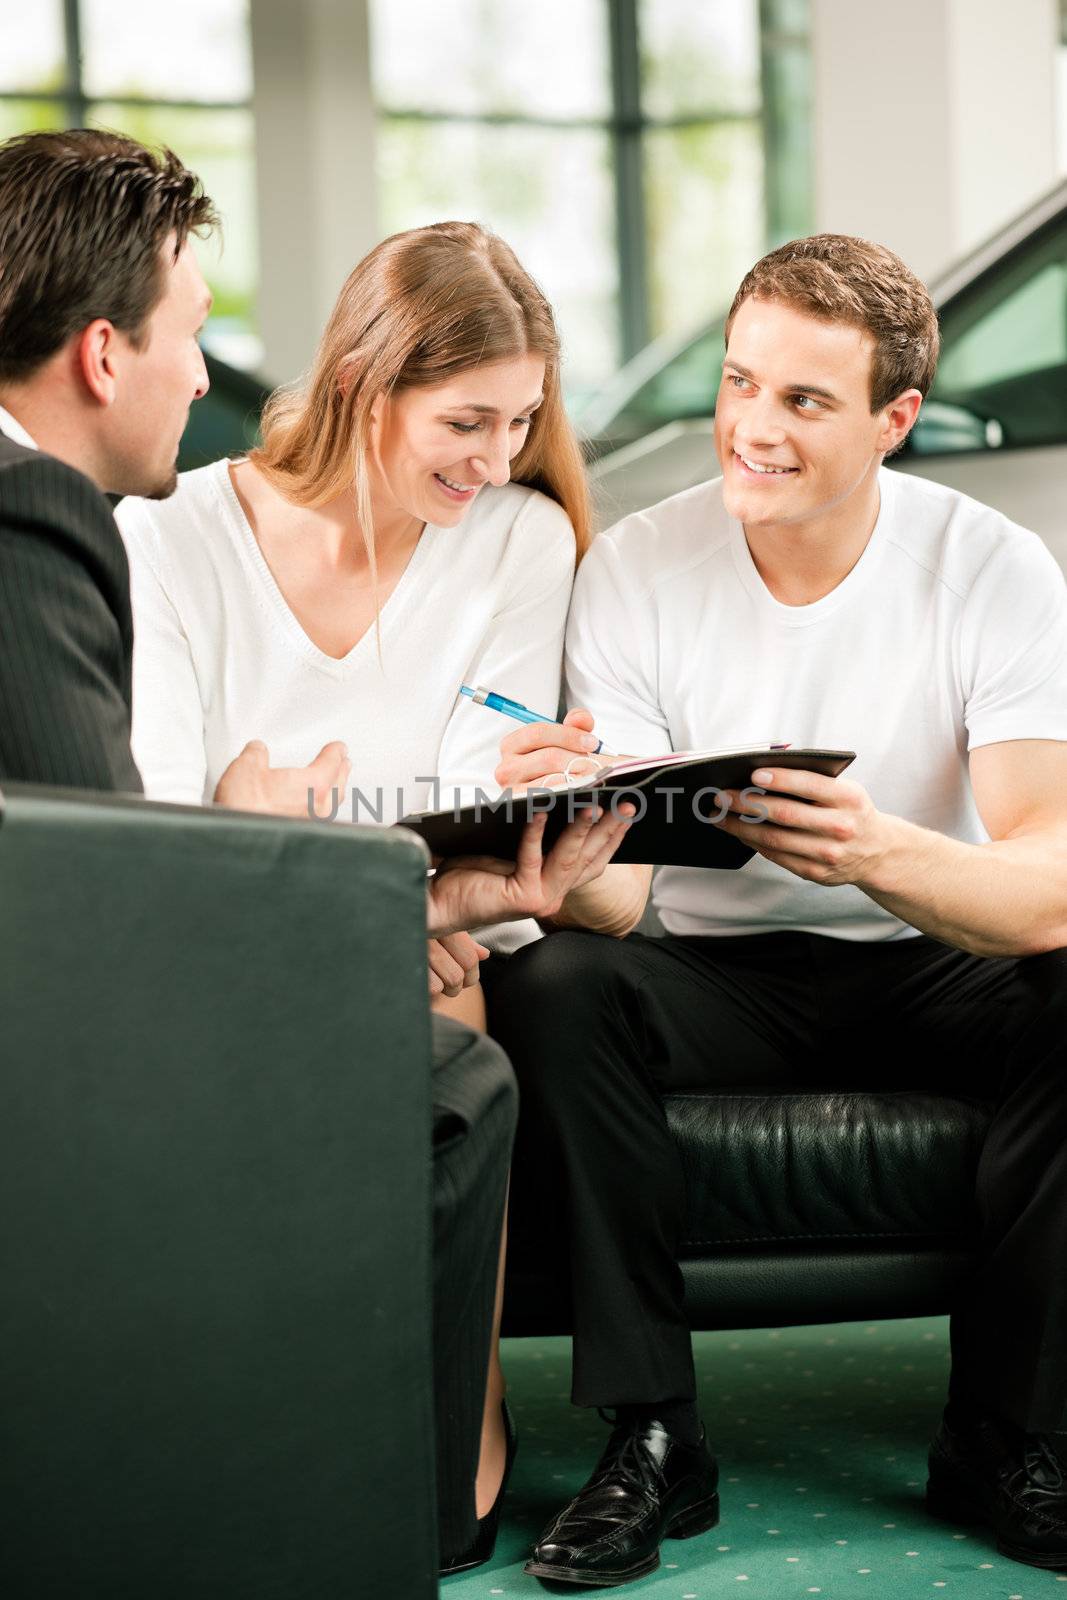 Sales situation in a car dealership, the young couple is signing the sales contract to get the new car in the background